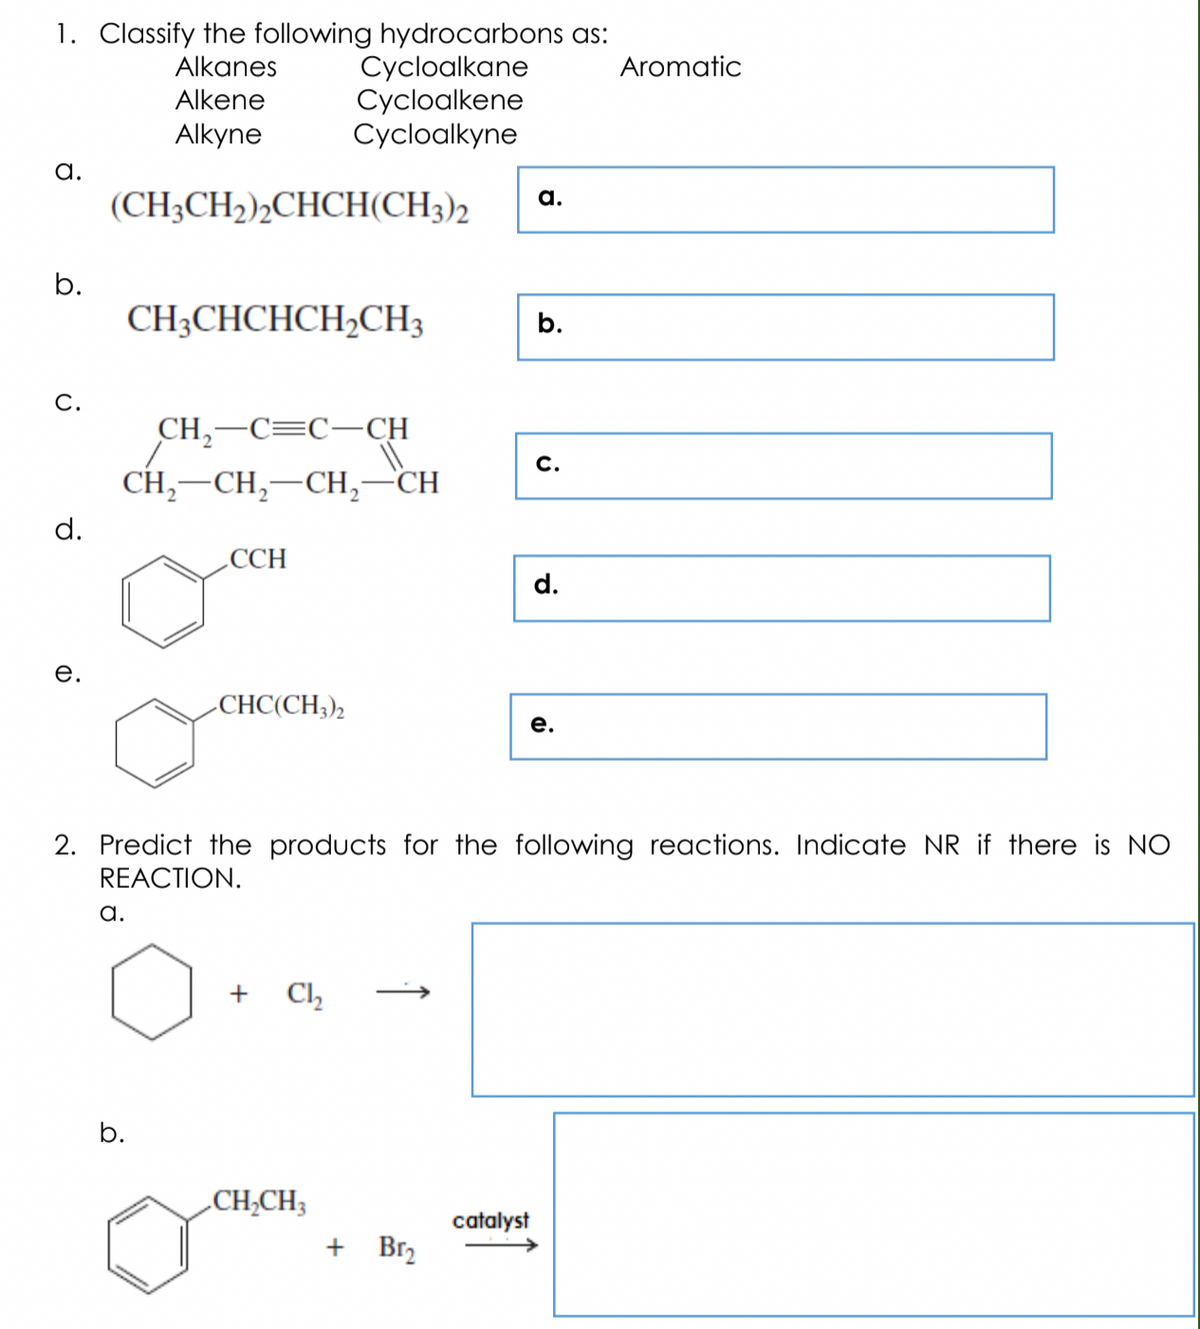 1. Classify the following hydrocarbons as:
Cycloalkane
Cycloalkene
Cycloalkyne
Alkanes
Aromatic
Alkene
Alkyne
а.
(CH3CH2)½CHCH(CH3)2
а.
b.
CH3CHCHCH,CH3
b.
С.
CH,-C=C-CH
С.
CH,–CH,–CH,-
CH
d.
.CCH
d.
е.
-CHC(CH;),
е.
2. Predict the products for the following reactions. Indicate NR if there is NO
REACTION.
а.
+
Cl,
b.
.CH;CH3
catalyst
+ Br2
↑
